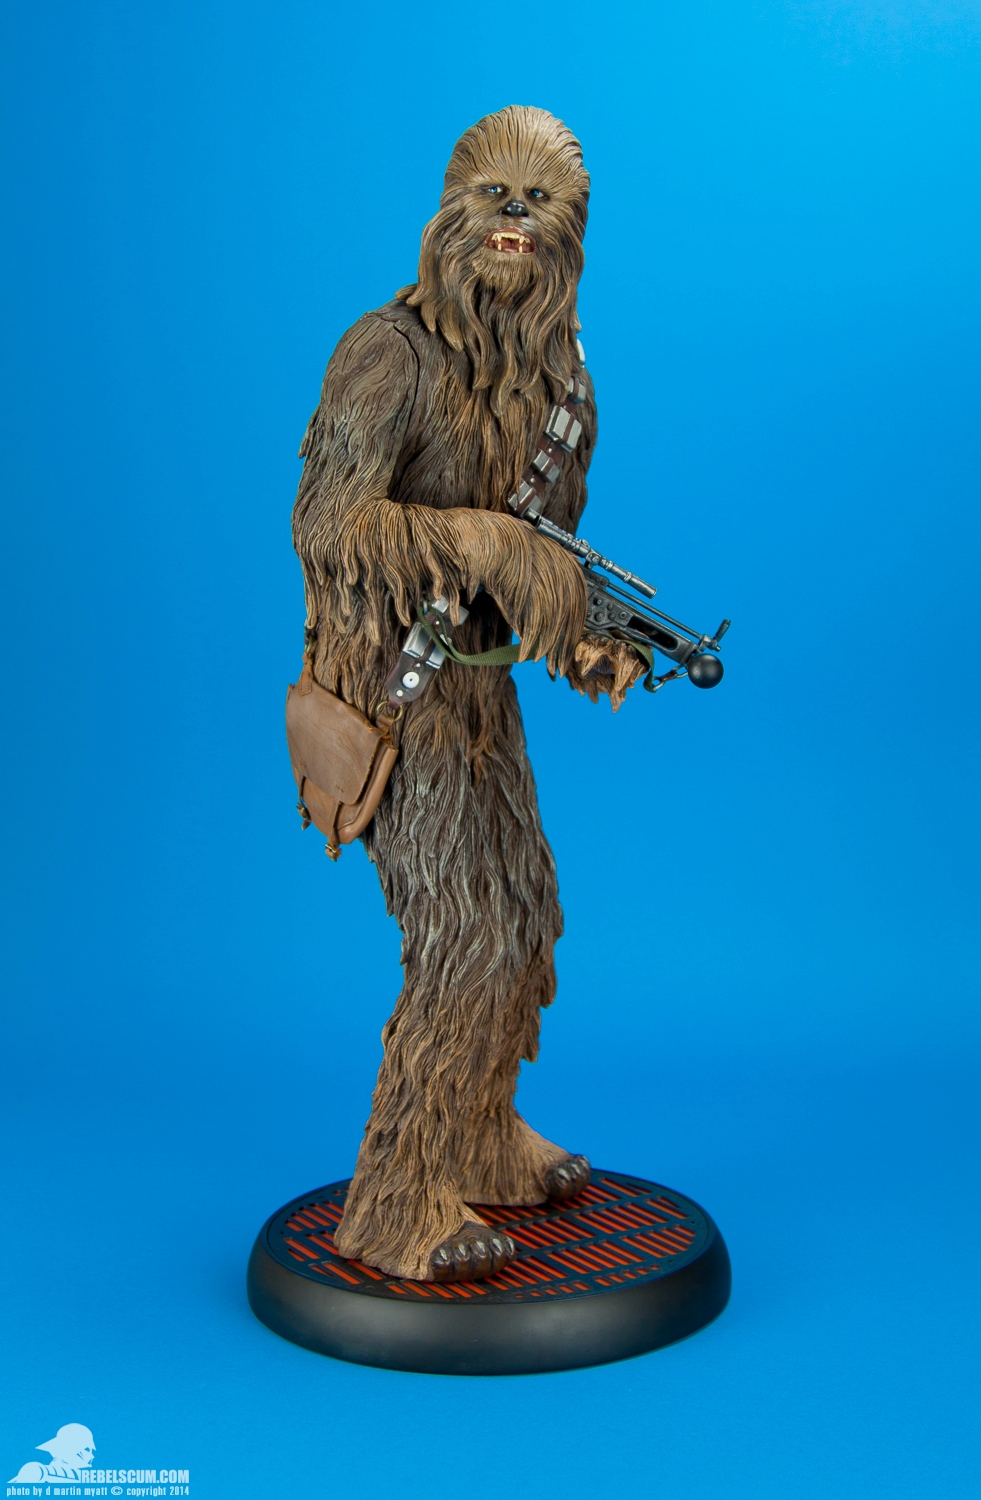 Chewbacca-Premium-Format-Figure-Sideshow-Collectibles-Exclusive-001.jpg